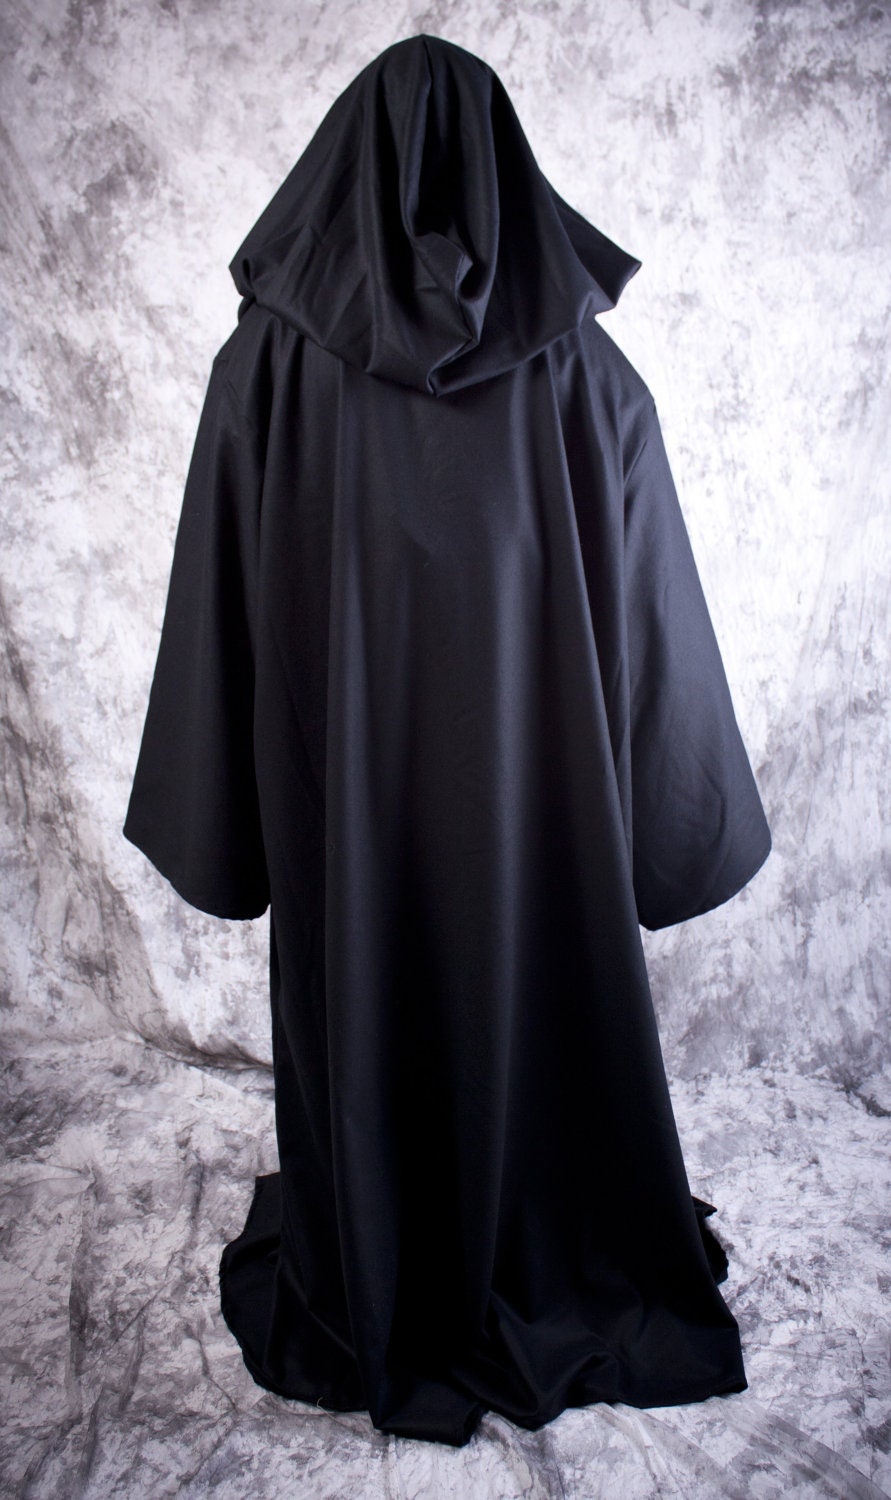 Jedi or Sith Robe for Star Wars Costume